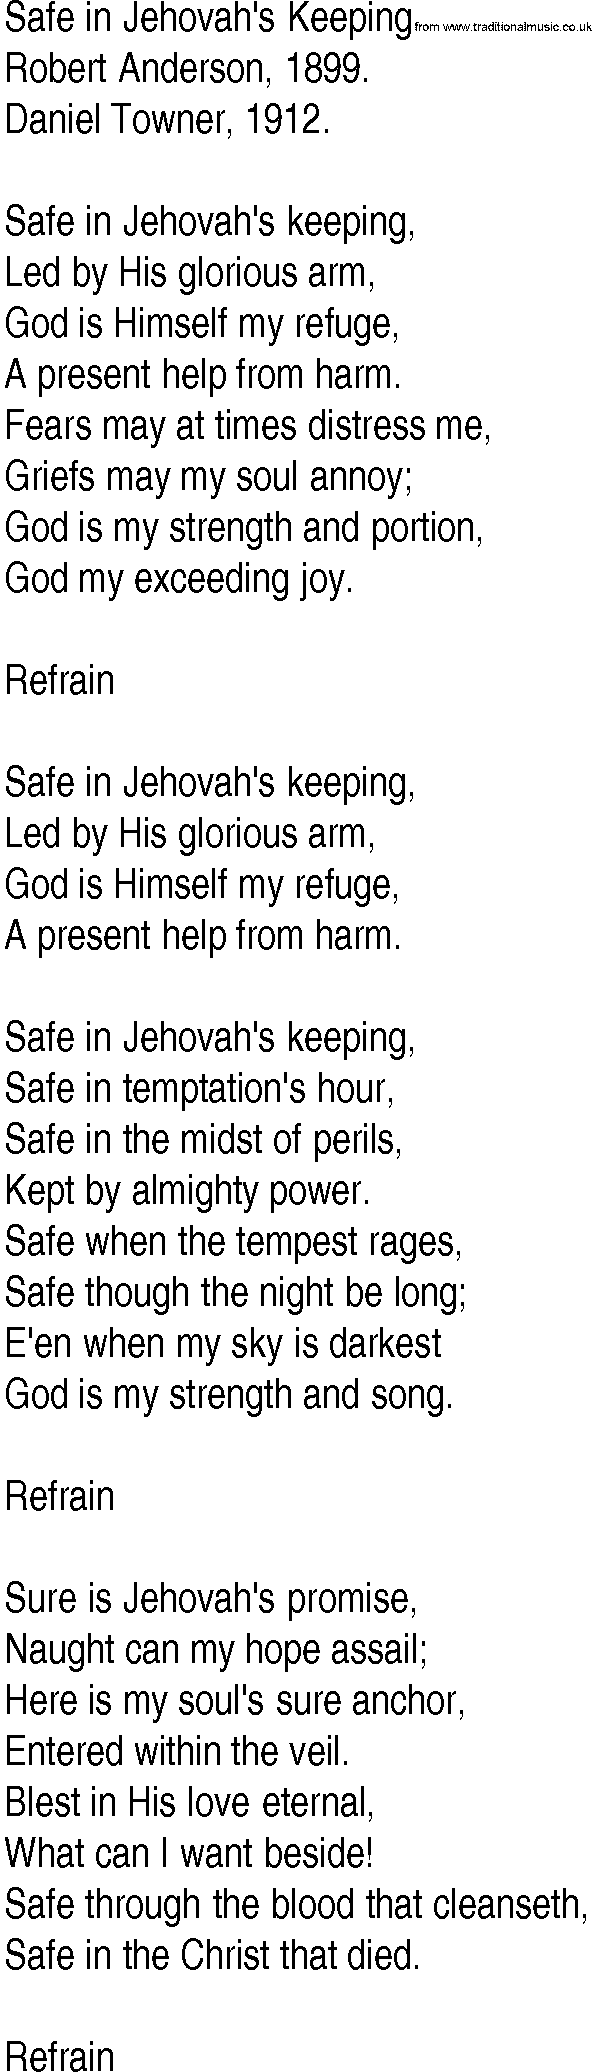 Hymn and Gospel Song: Safe in Jehovah's Keeping by Robert Anderson lyrics